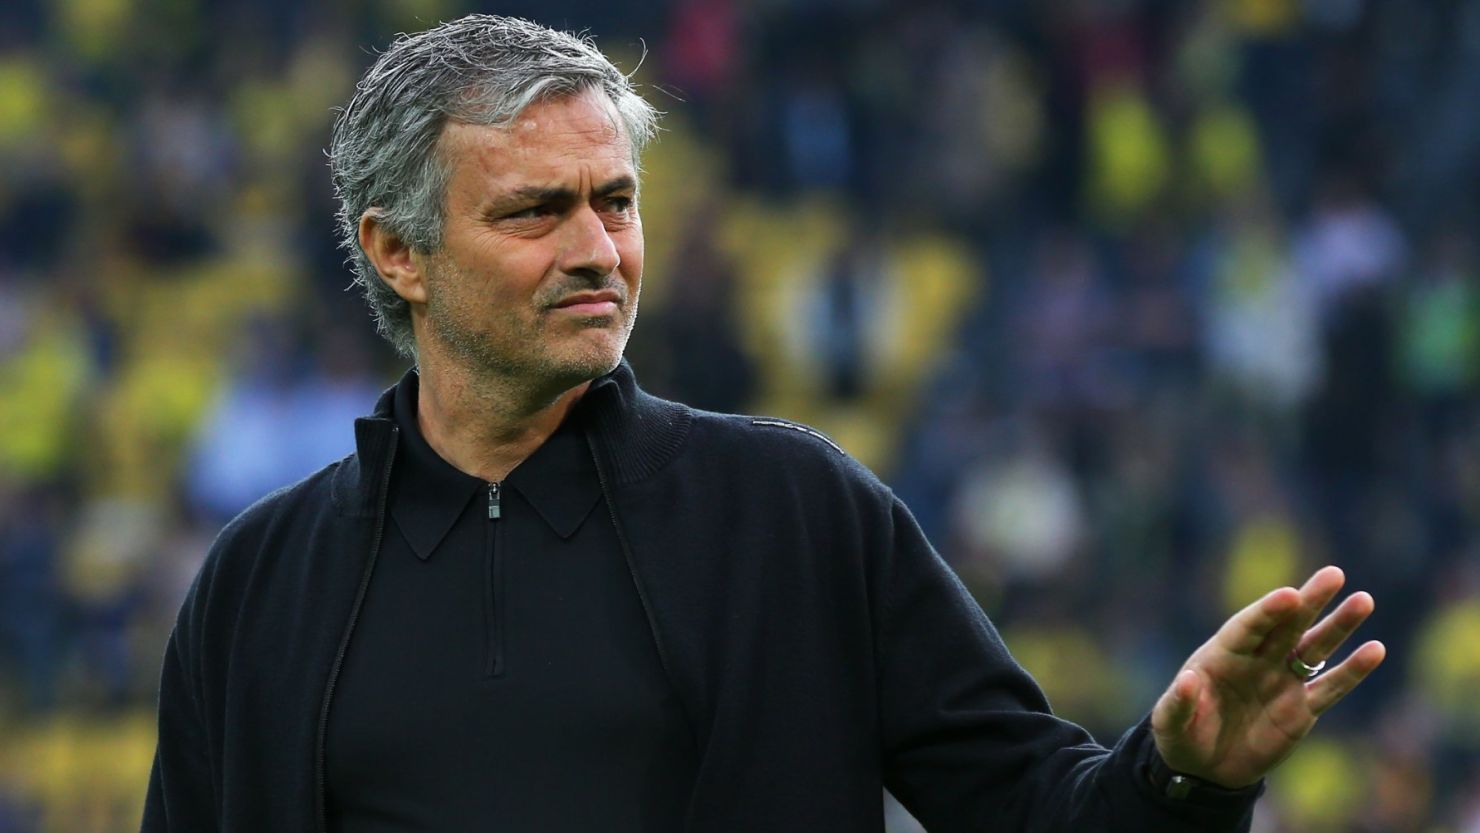 Jose Mourinho is widely expected to leave Real Madrid for English club Chelsea at the end of season